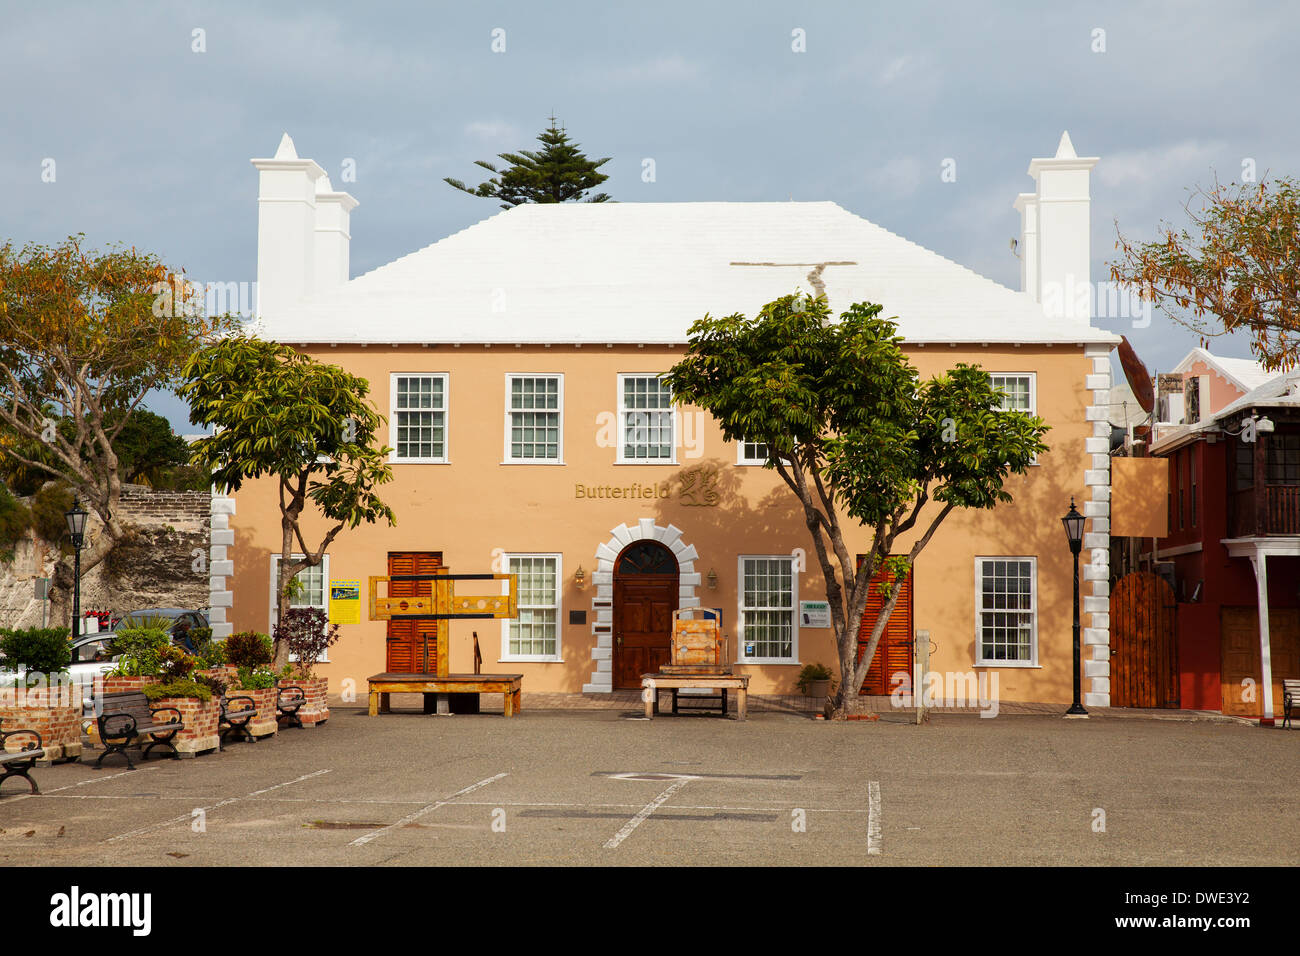 Butterfield Bank Building In St George Bermuda Stock Photo